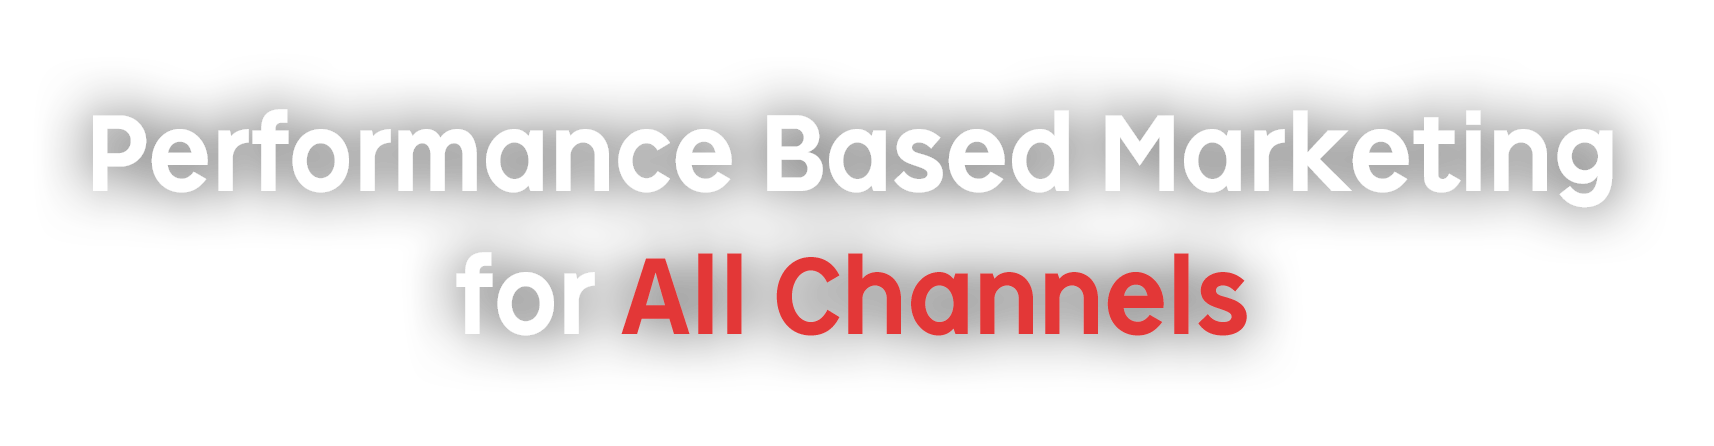 Performance Based Marketing for All Channels